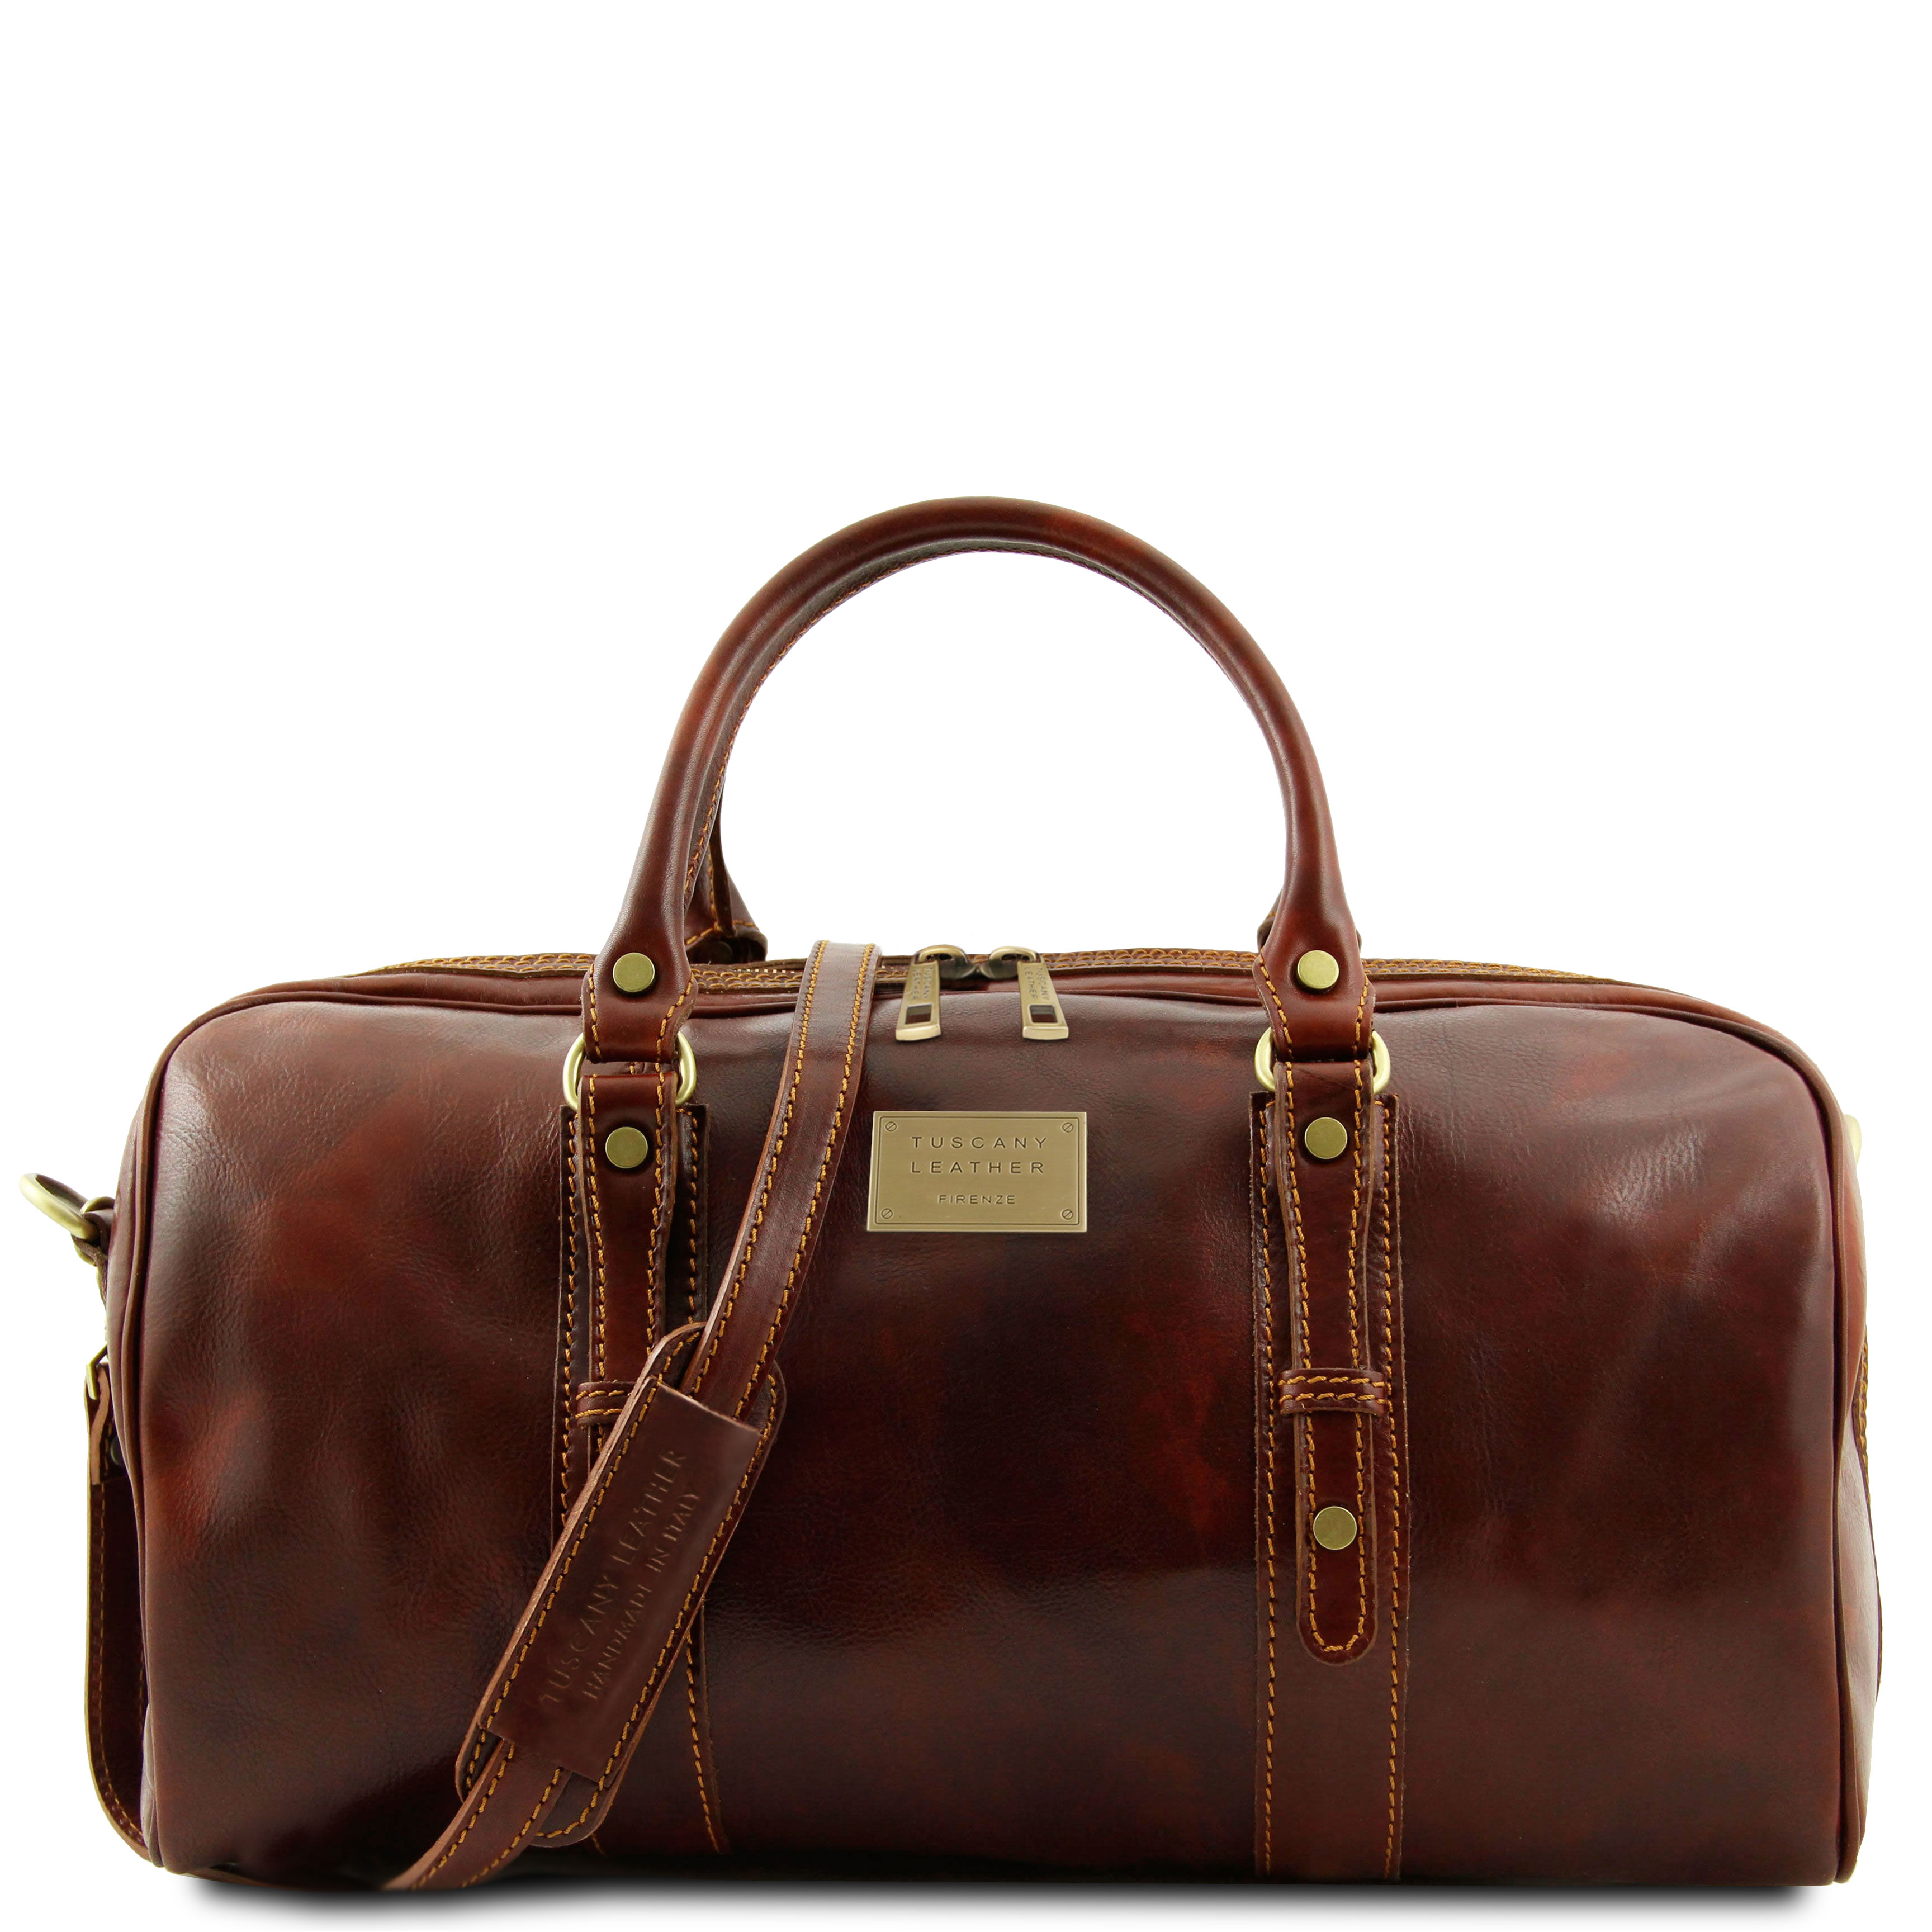 Francoforte Exclusive Leather Weekender Travel Bag - Small size Brown